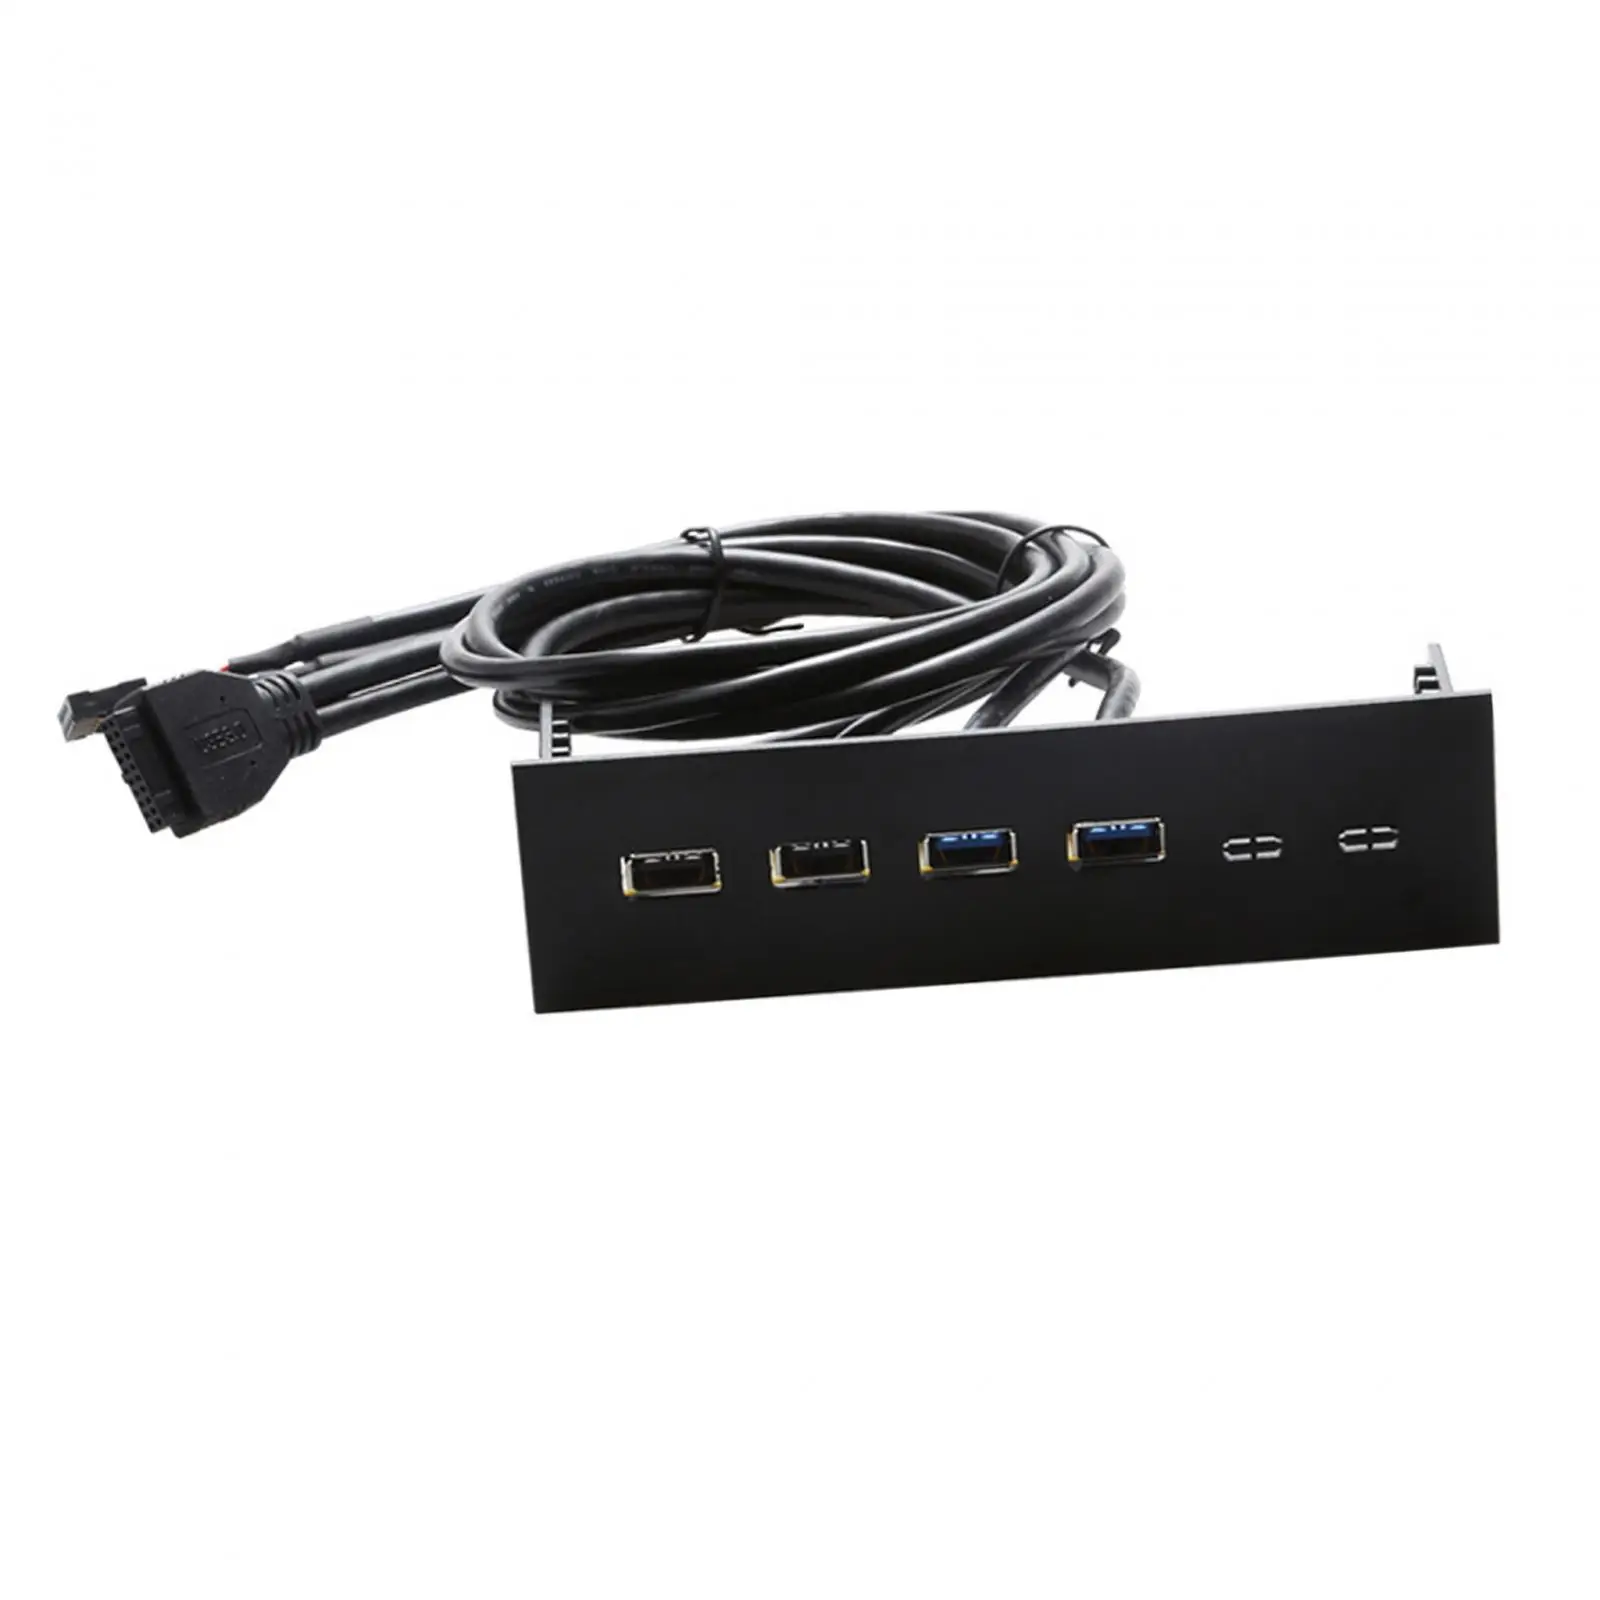 USB Front Panel Hub USB Front Panel Adapter Computer Expansion Board Front Panel USB Optical Drive Bay for PC Computer Case